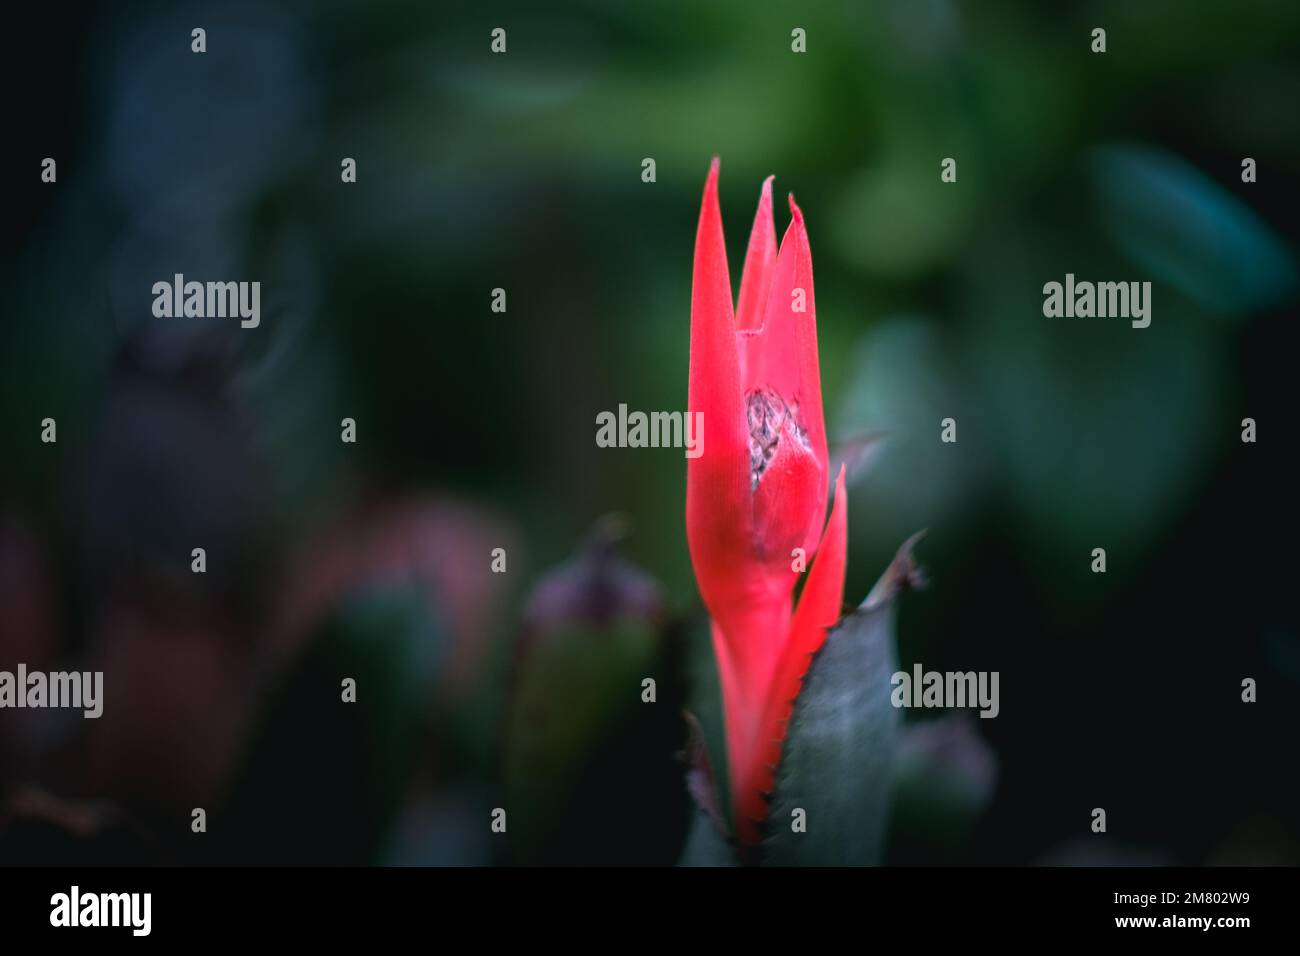 A closeup of a red Bromelia (Bromelia) against blurred green background Stock Photo